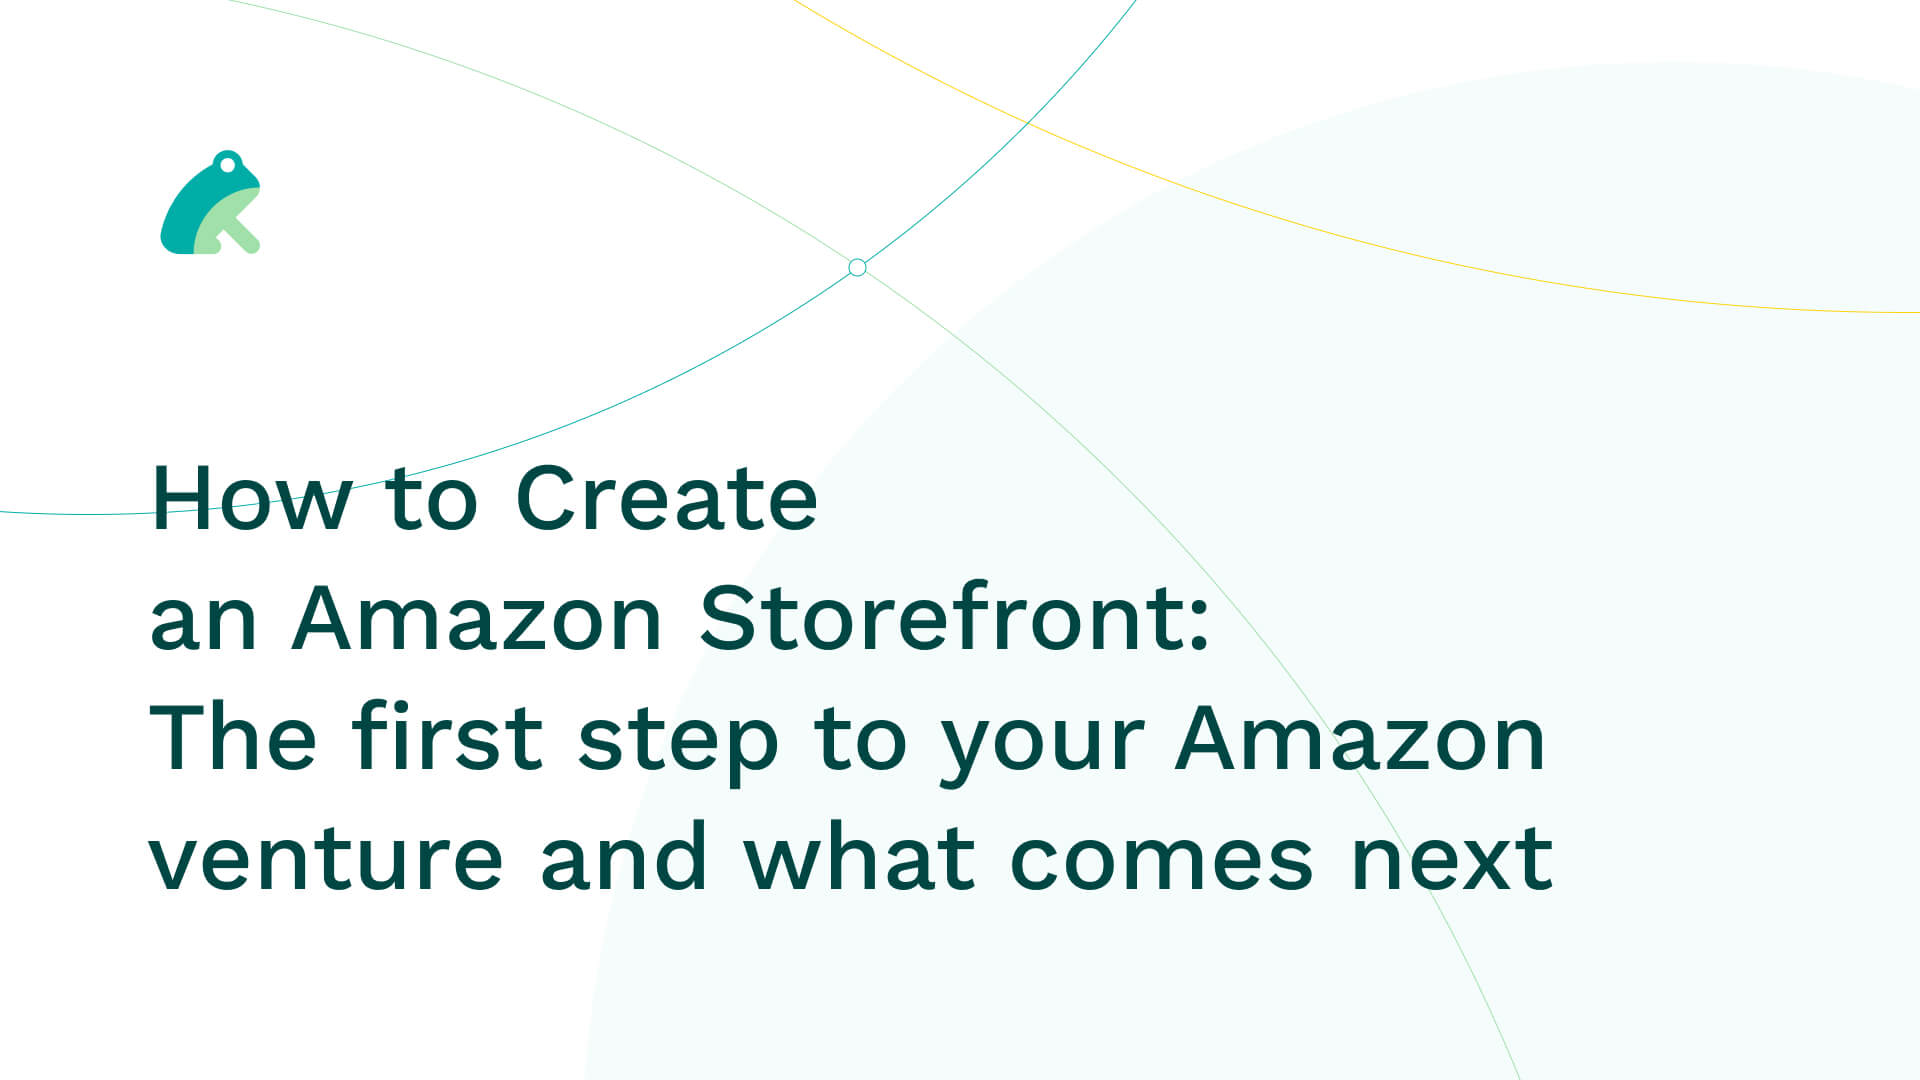 How to Create an Amazon Storefront: The first step to your Amazon venture and what comes next